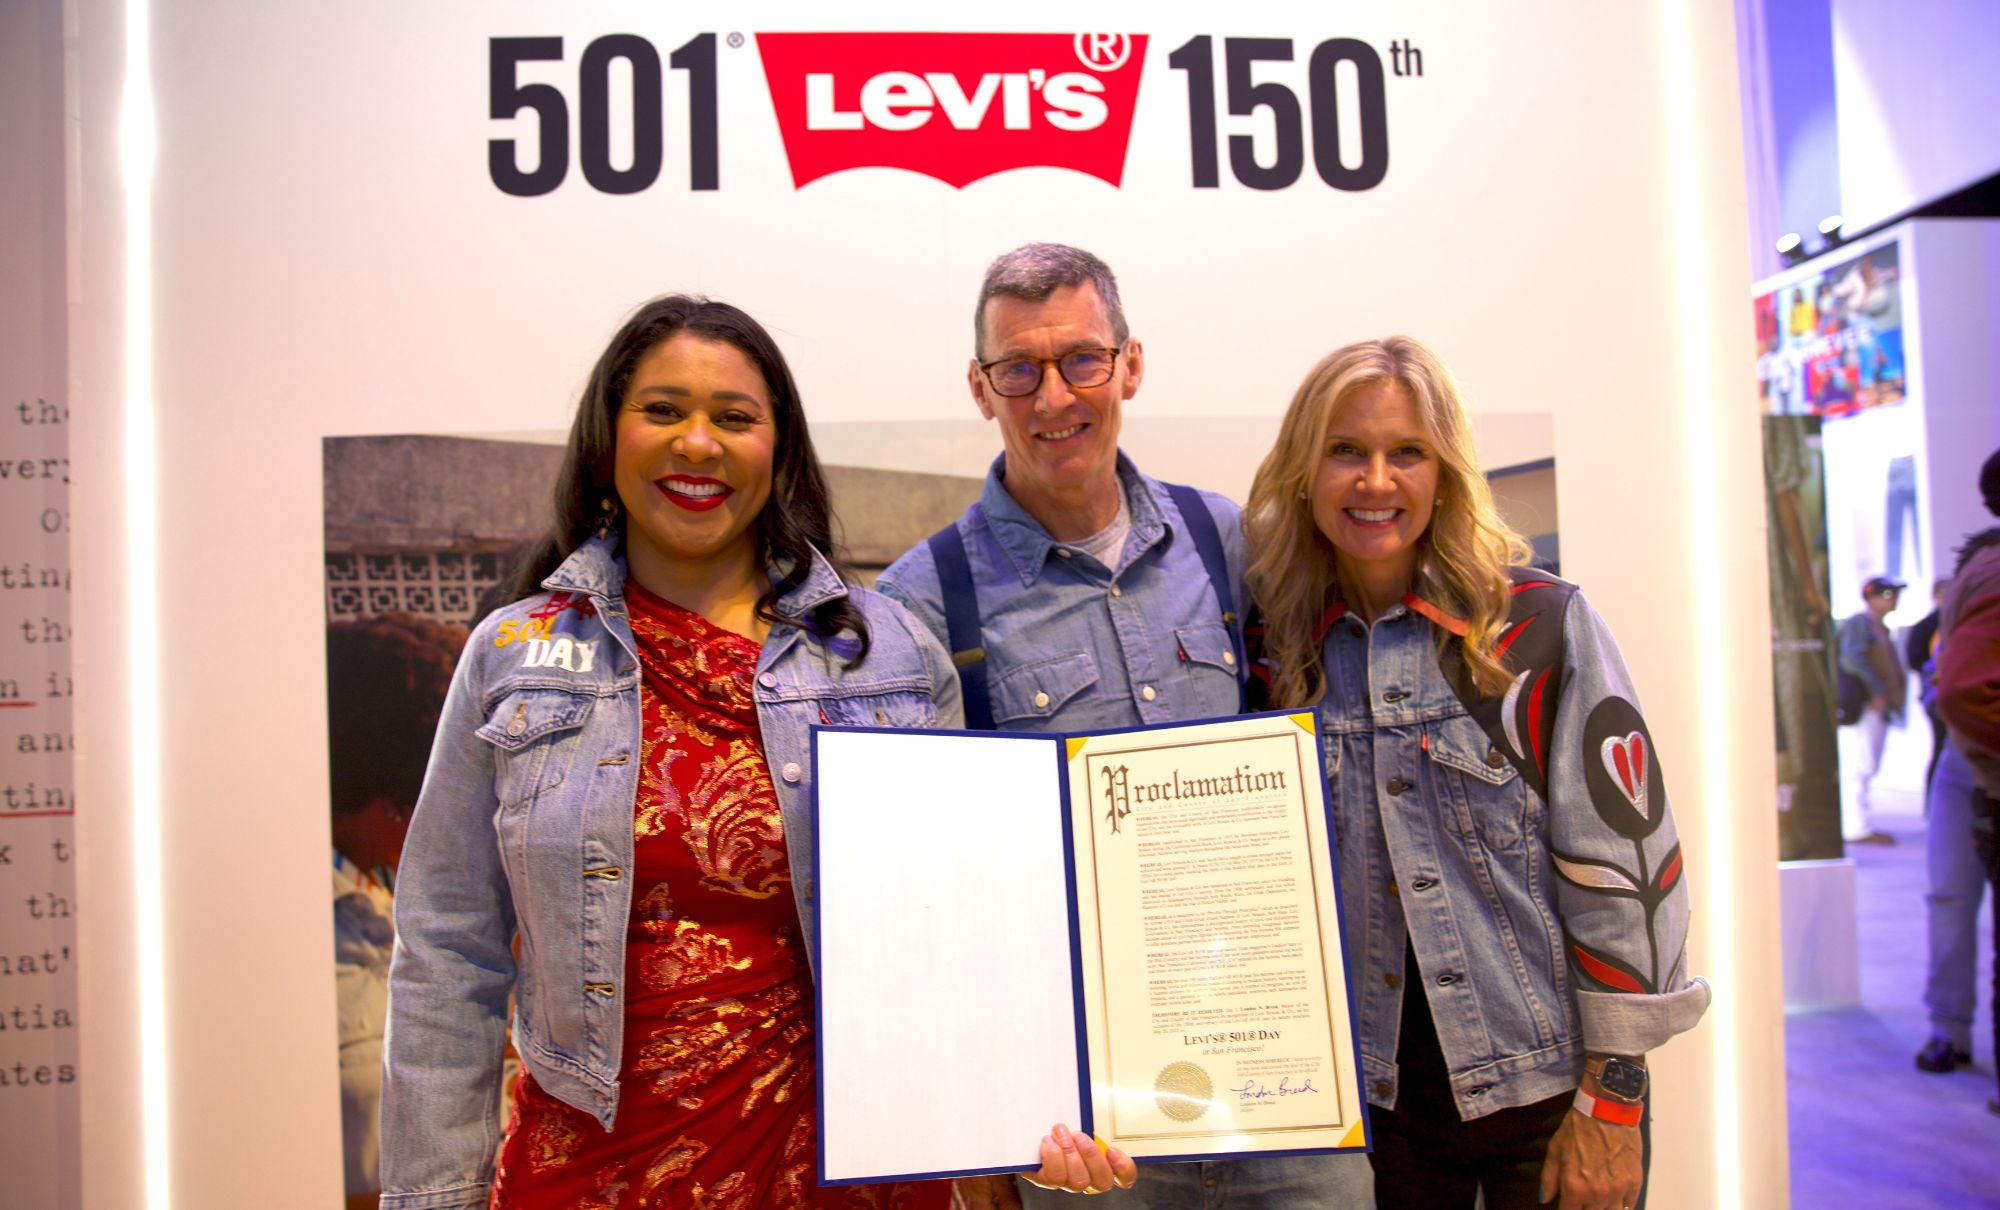 Mayor London Breed, Chip Bergh holding the Proclamation, Michelle Gass